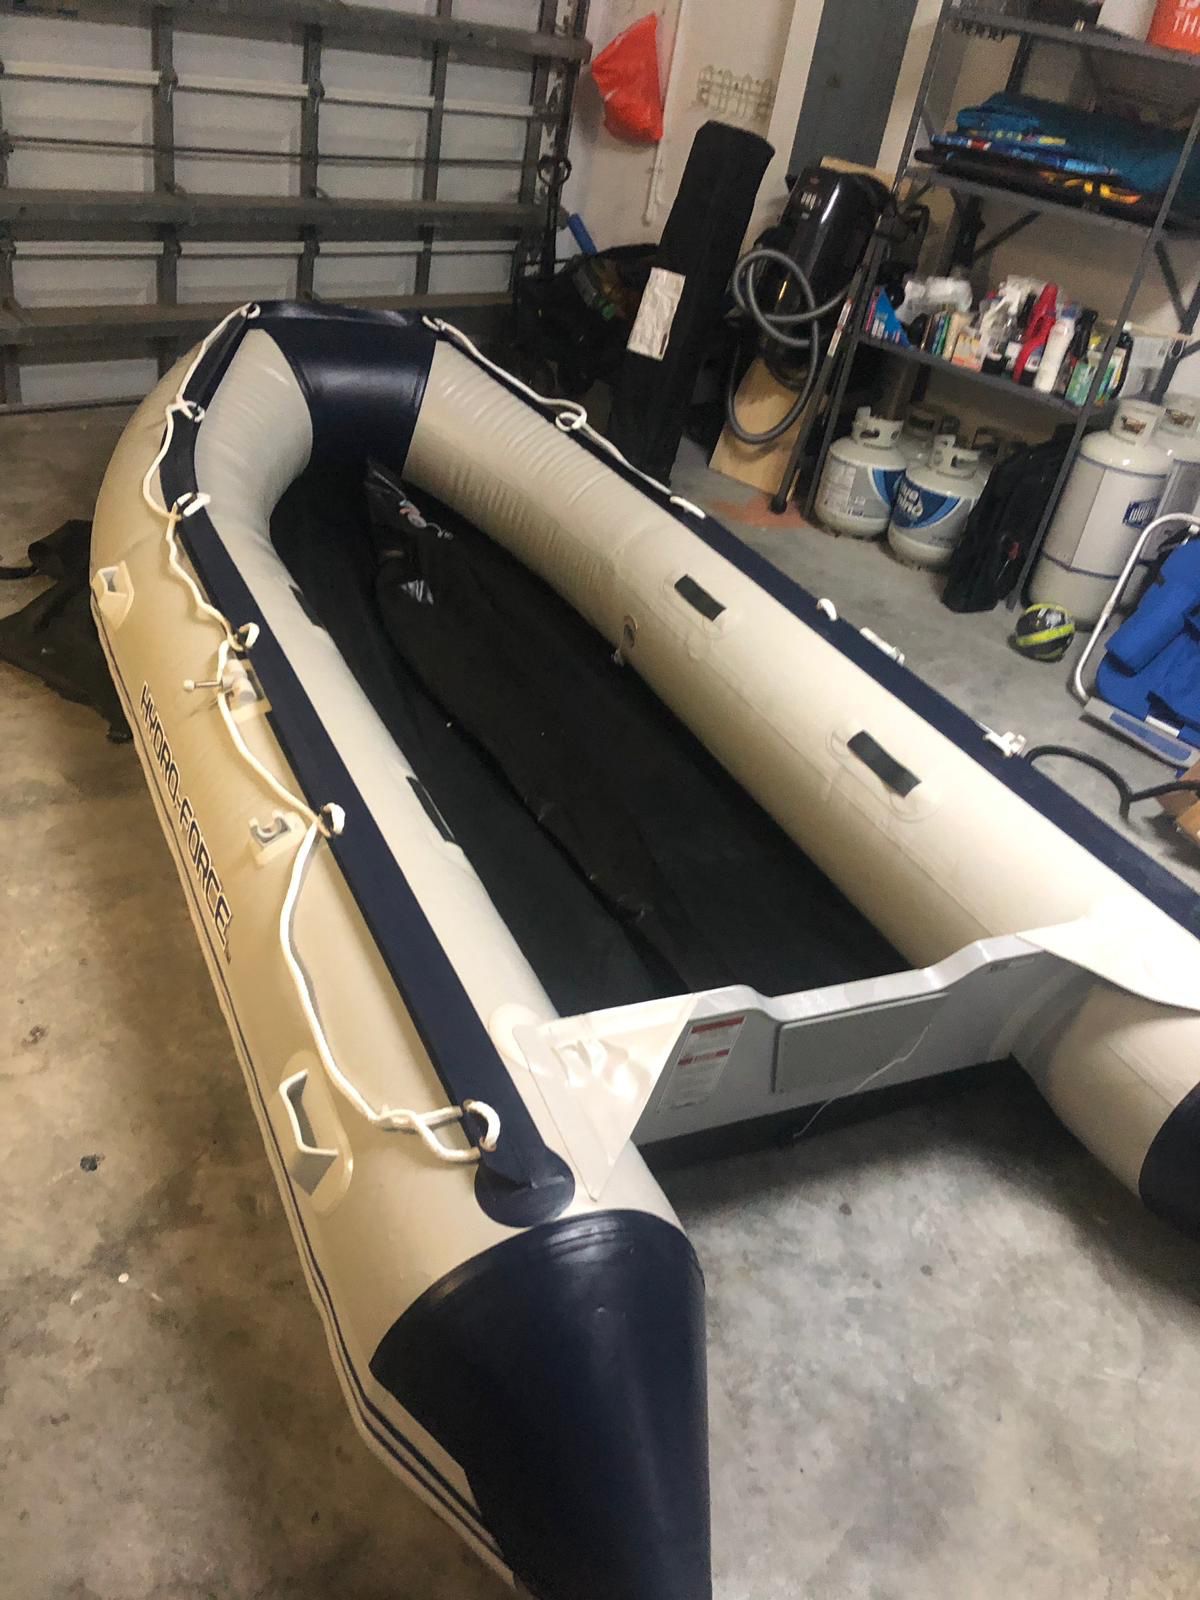 Hydro Force sunsaille inflatable boat 12’6 title on hand